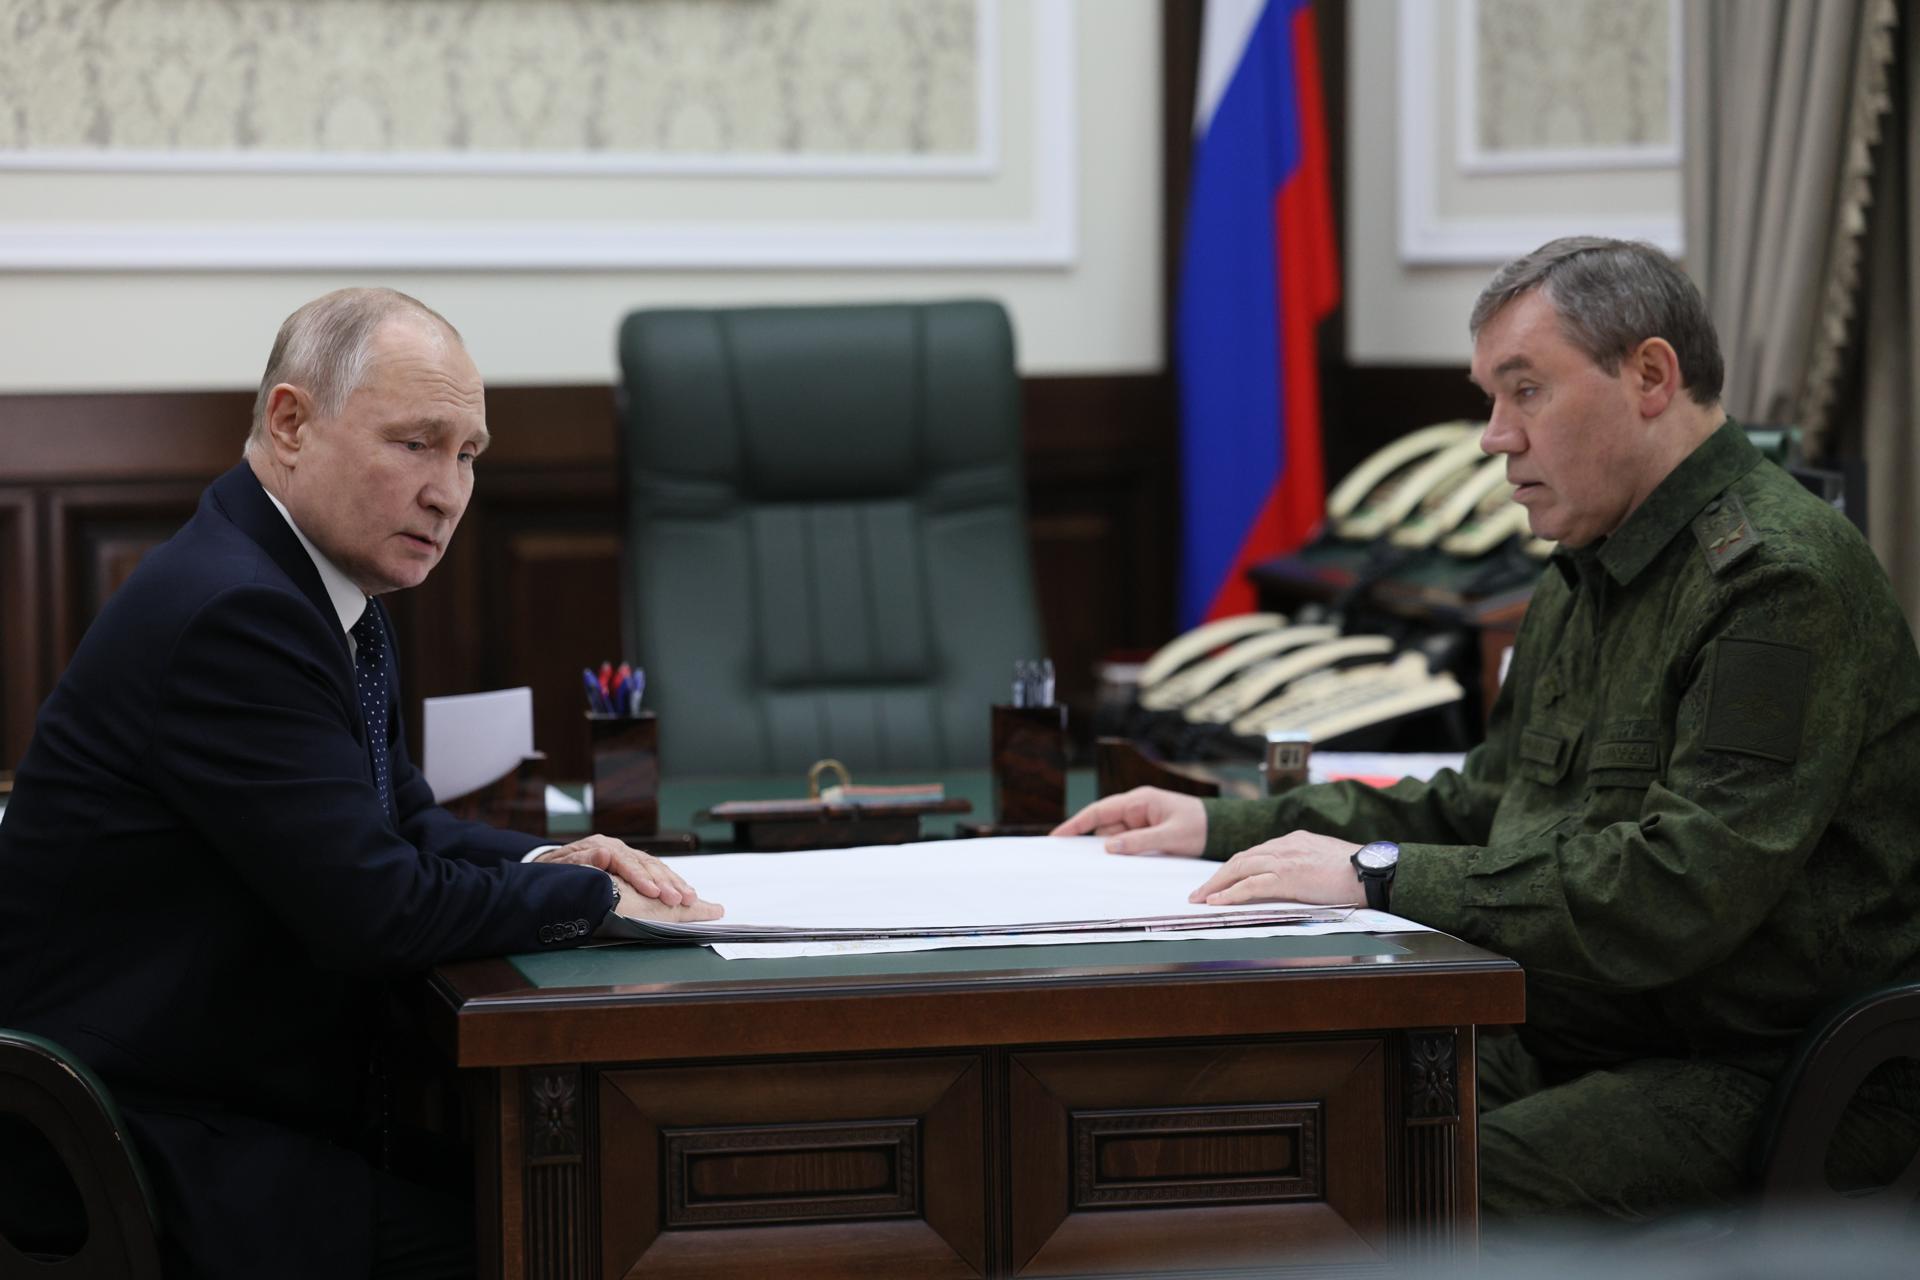 Russian President Vladimir Putin (L) speaks with the Chief of the General Staff of the Armed Forces of the Russian Federation, Valery Gerasimov, in the headquarters of the Russian Armed Forces in Rostov-on-Don, Russia, 20 October 2023. EFE/EPA/GAVRIIL GRIGOROV/KREMLIN / POOL MANDATORY CREDIT
